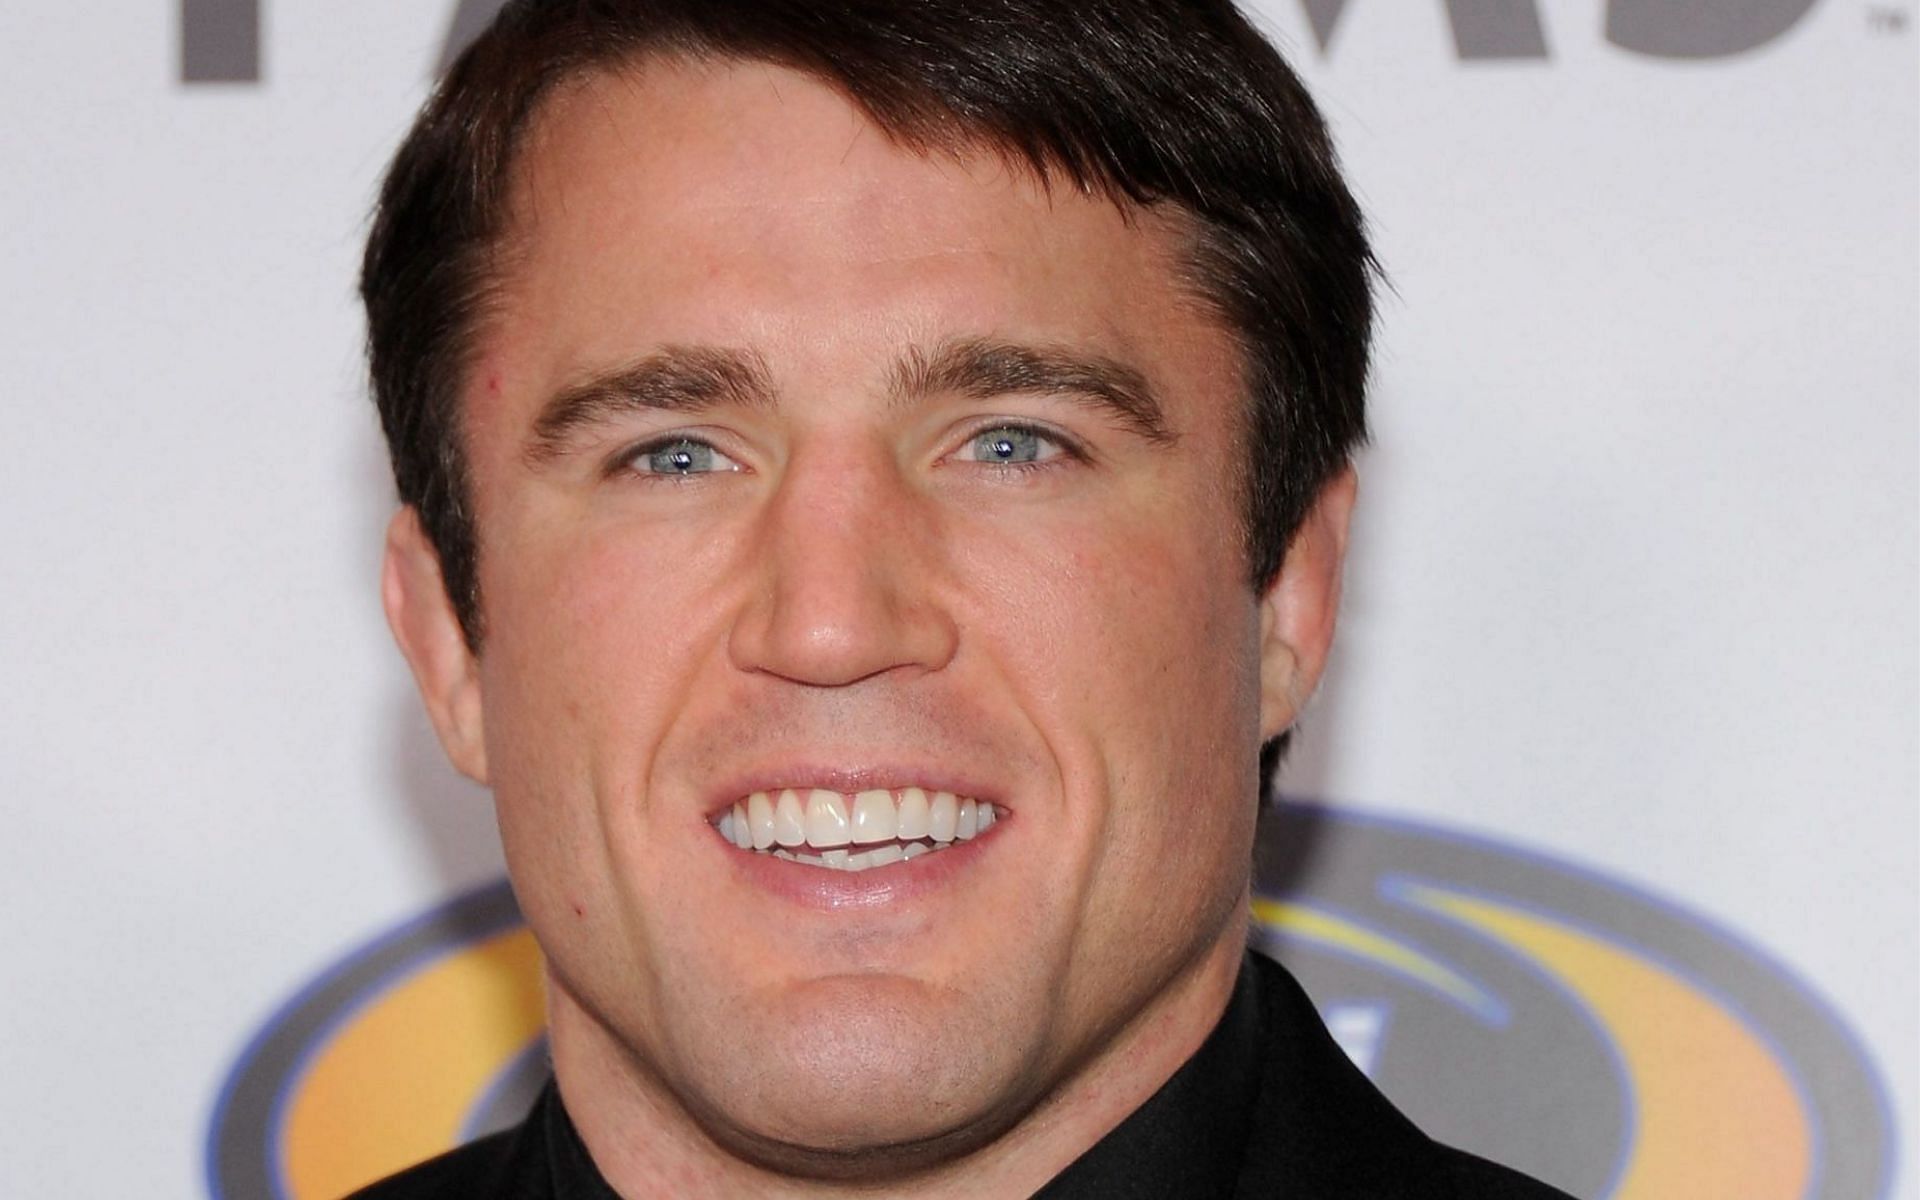 Chael Sonnen has never been afraid to share his opinions